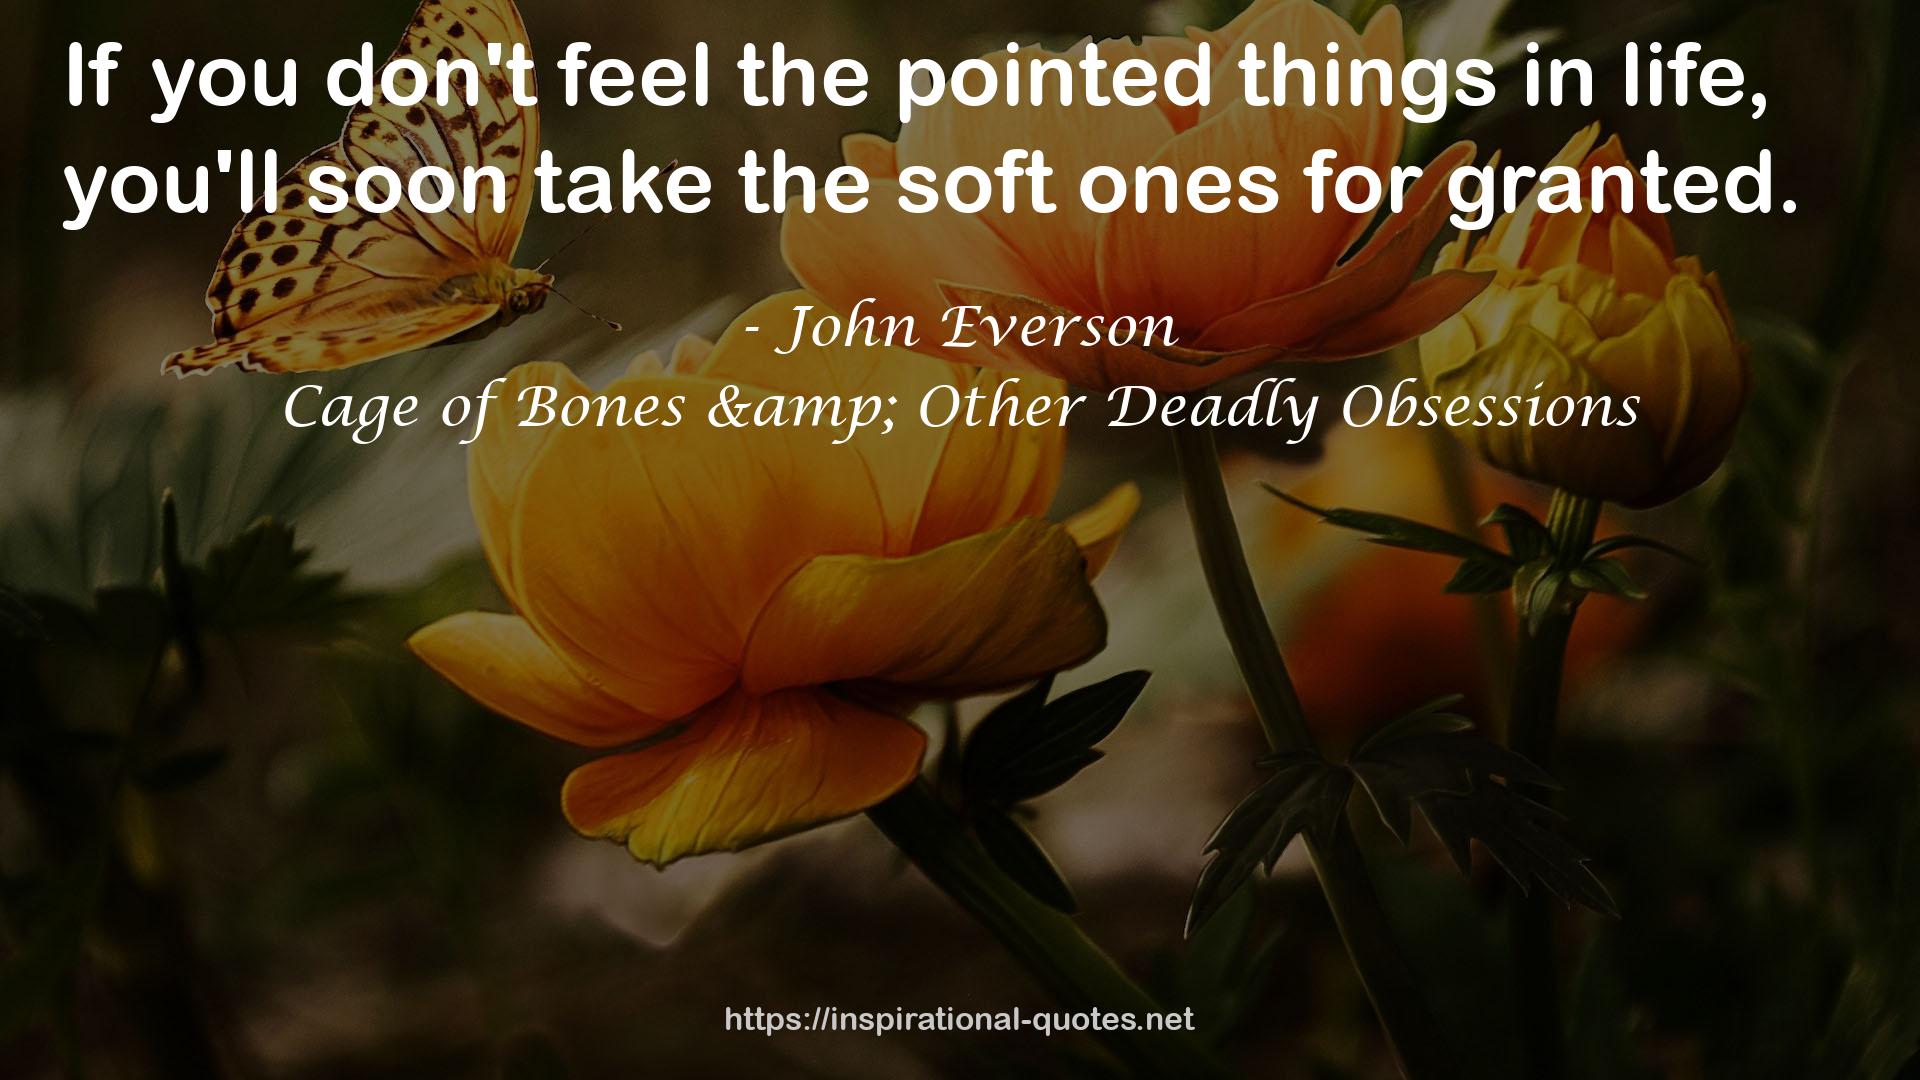 Cage of Bones & Other Deadly Obsessions QUOTES